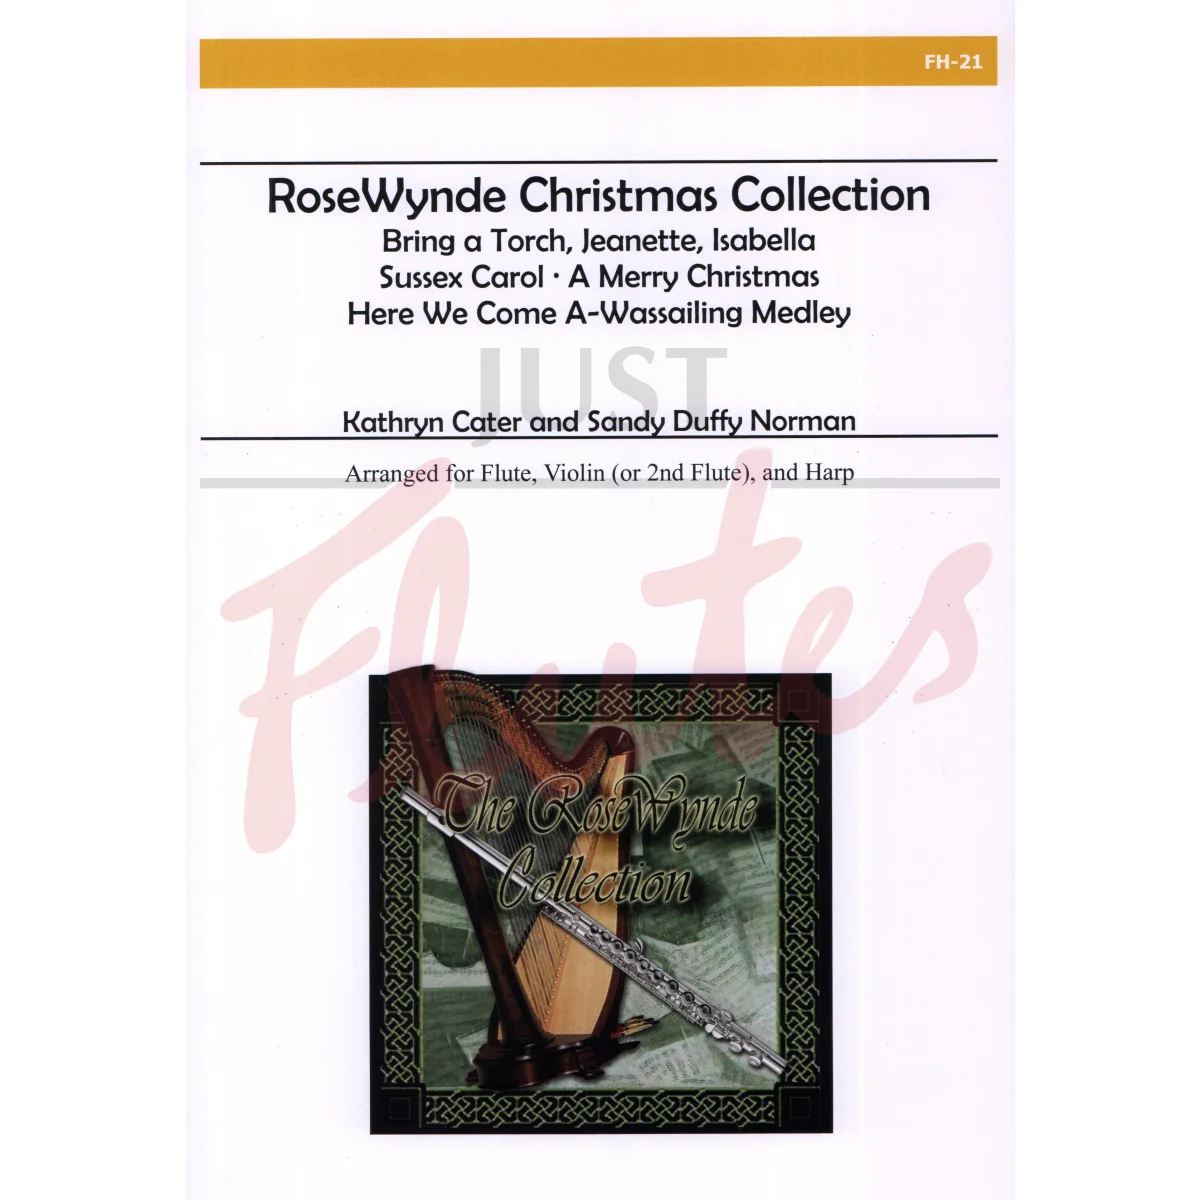 RoseWynde Christmas Collection for Flute. Violin/2nd Flute and Harp